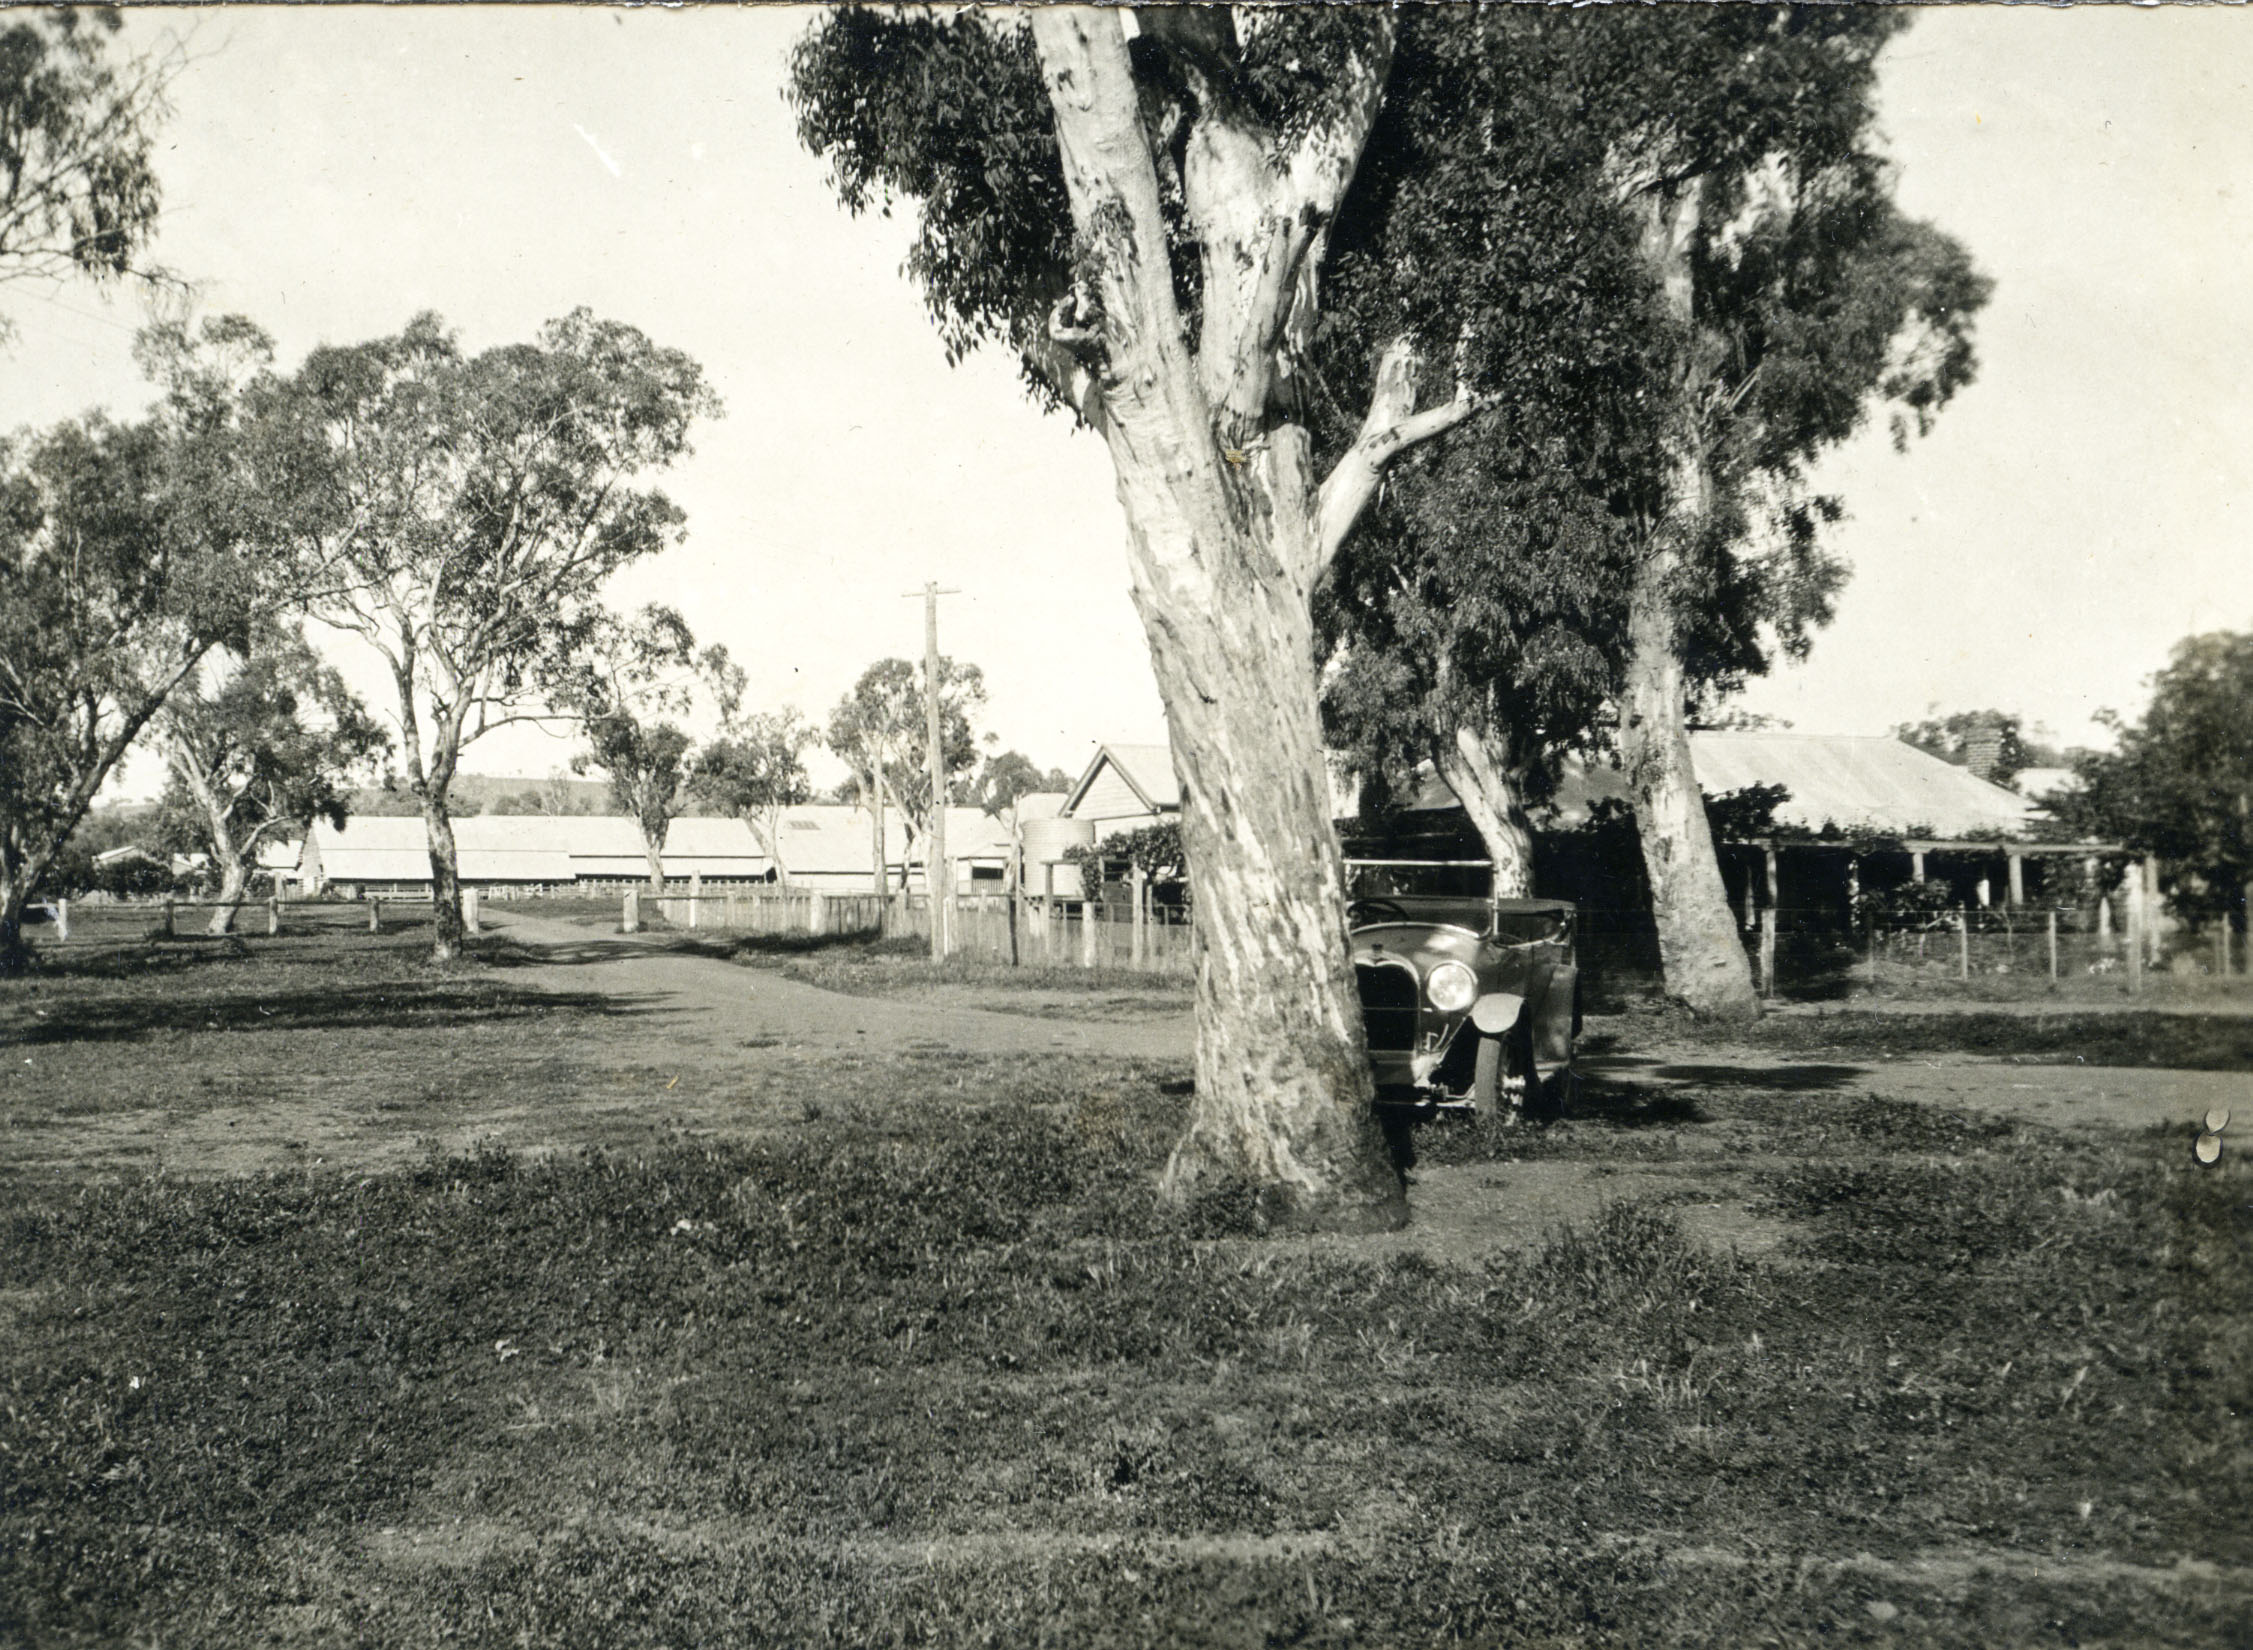 Wool shed and station huts, Warrah, New South Wales, 1921 (K3970). Photographer - Geoffrey T.A. Scott.